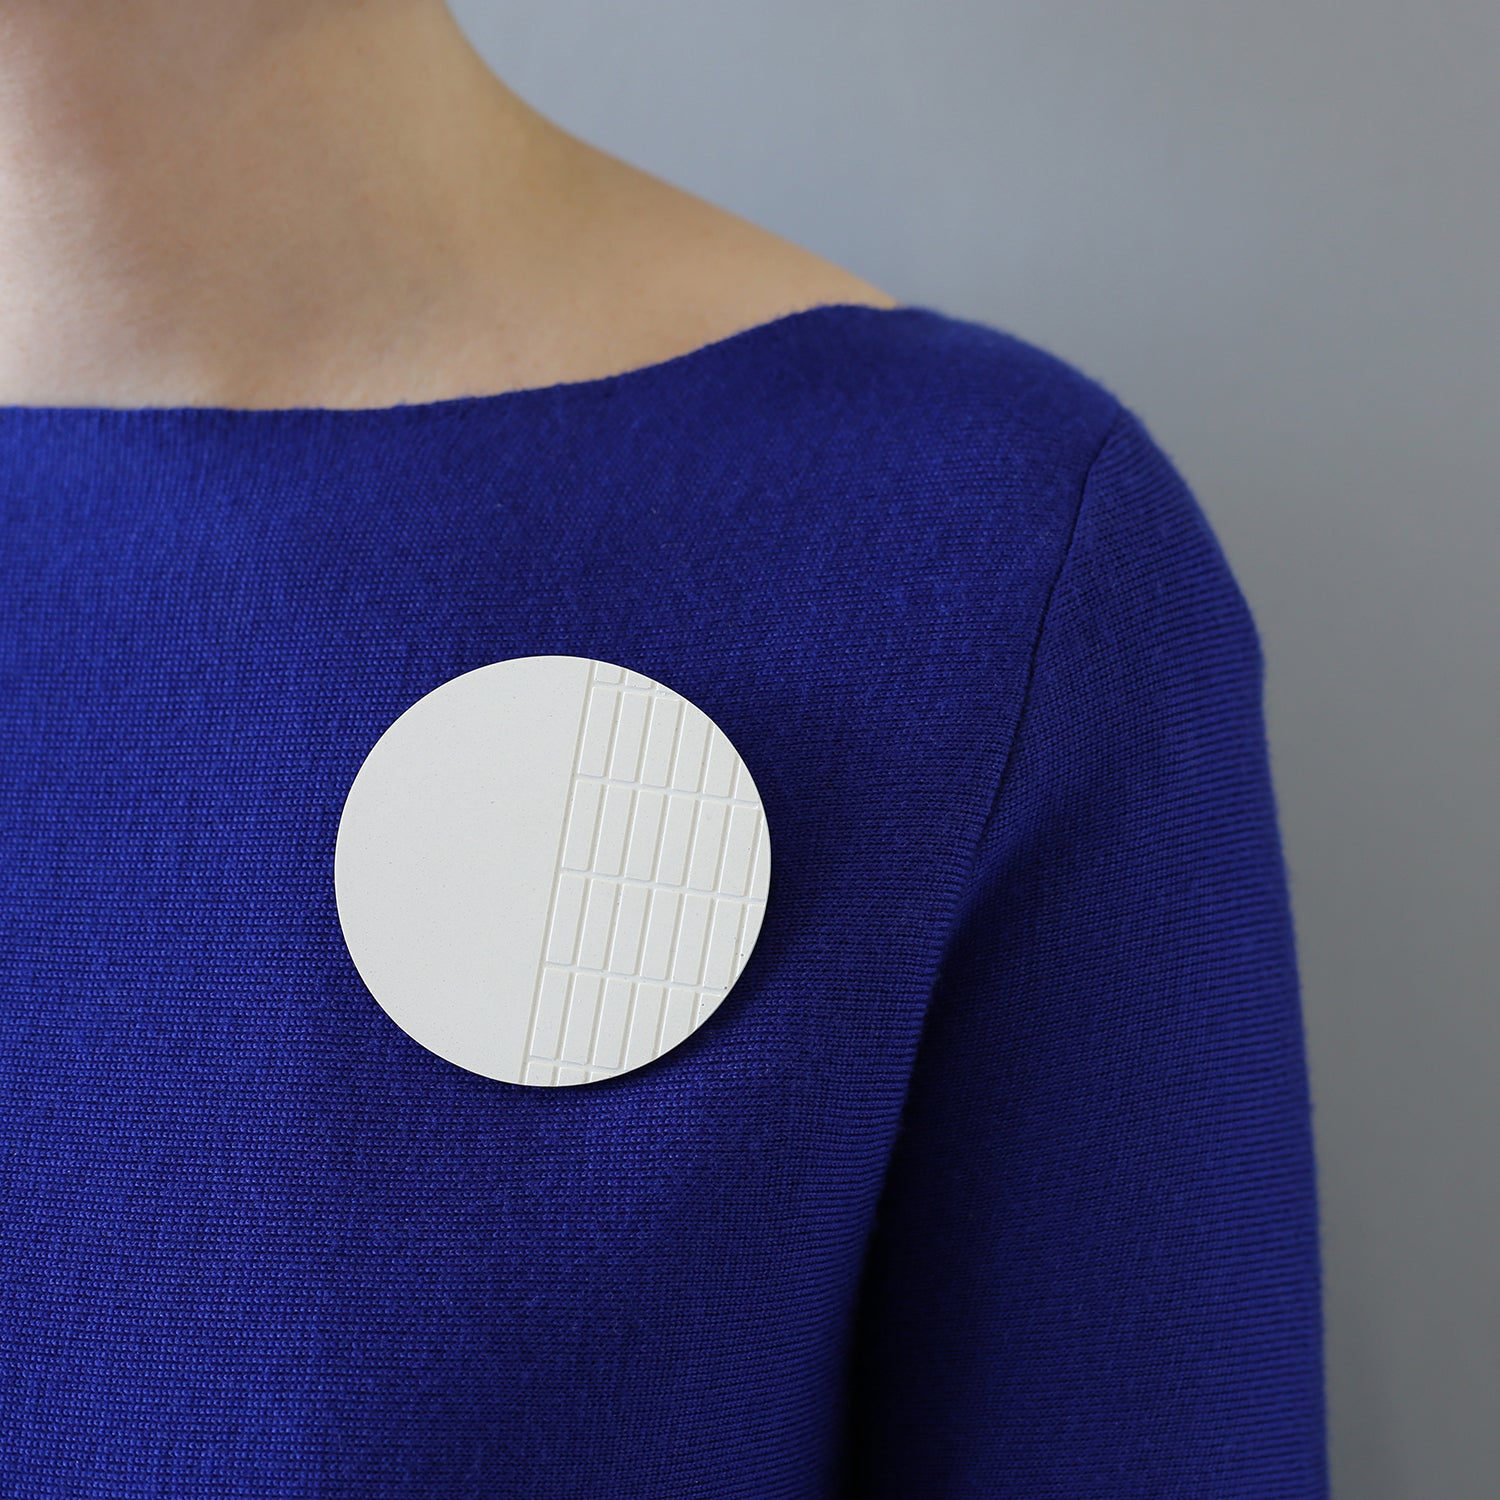 Handcast brooch inspired by the brutalist architecture of London's Barbican centre. This circular brooch has a fine grid recessed over half of the surface. Each brooch is cast by hand in our south London studio and comes in branded gift box. (7cm diameter) 